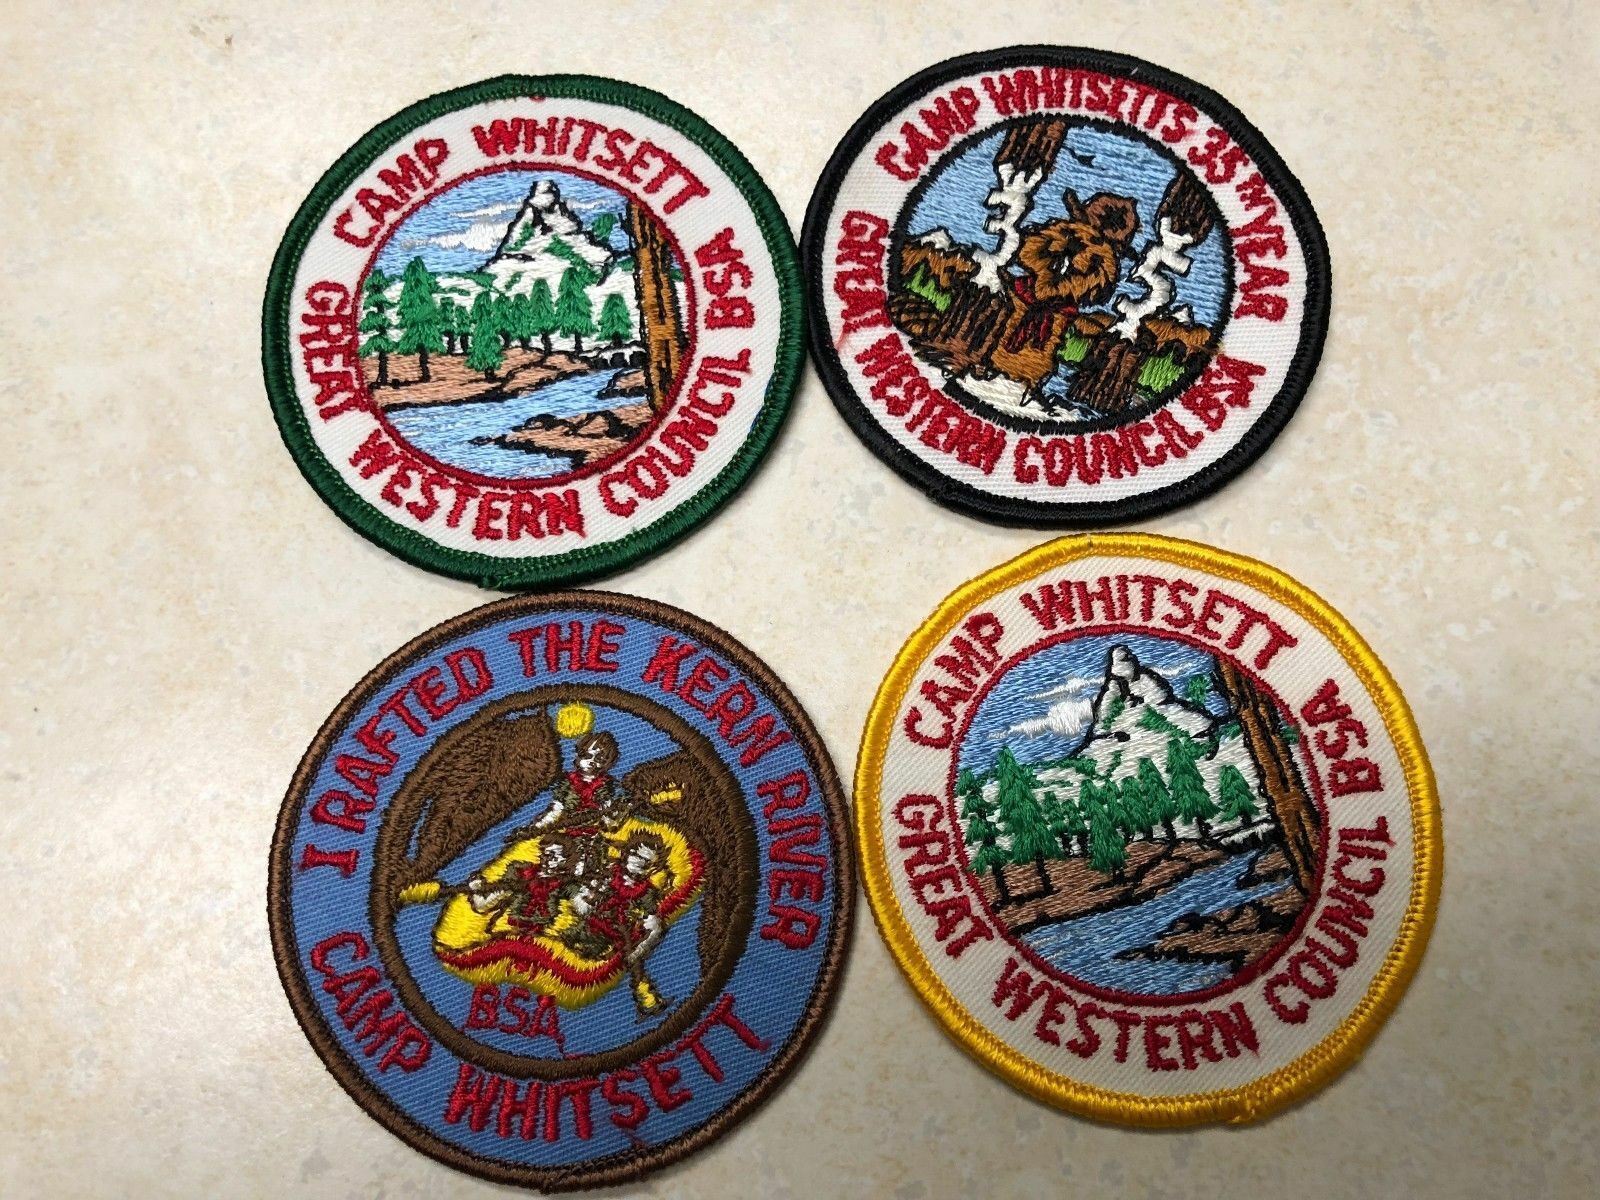 Lot of 4 Camp Whitsett Camp Patches 35th Anniv, Kern River, Etc.